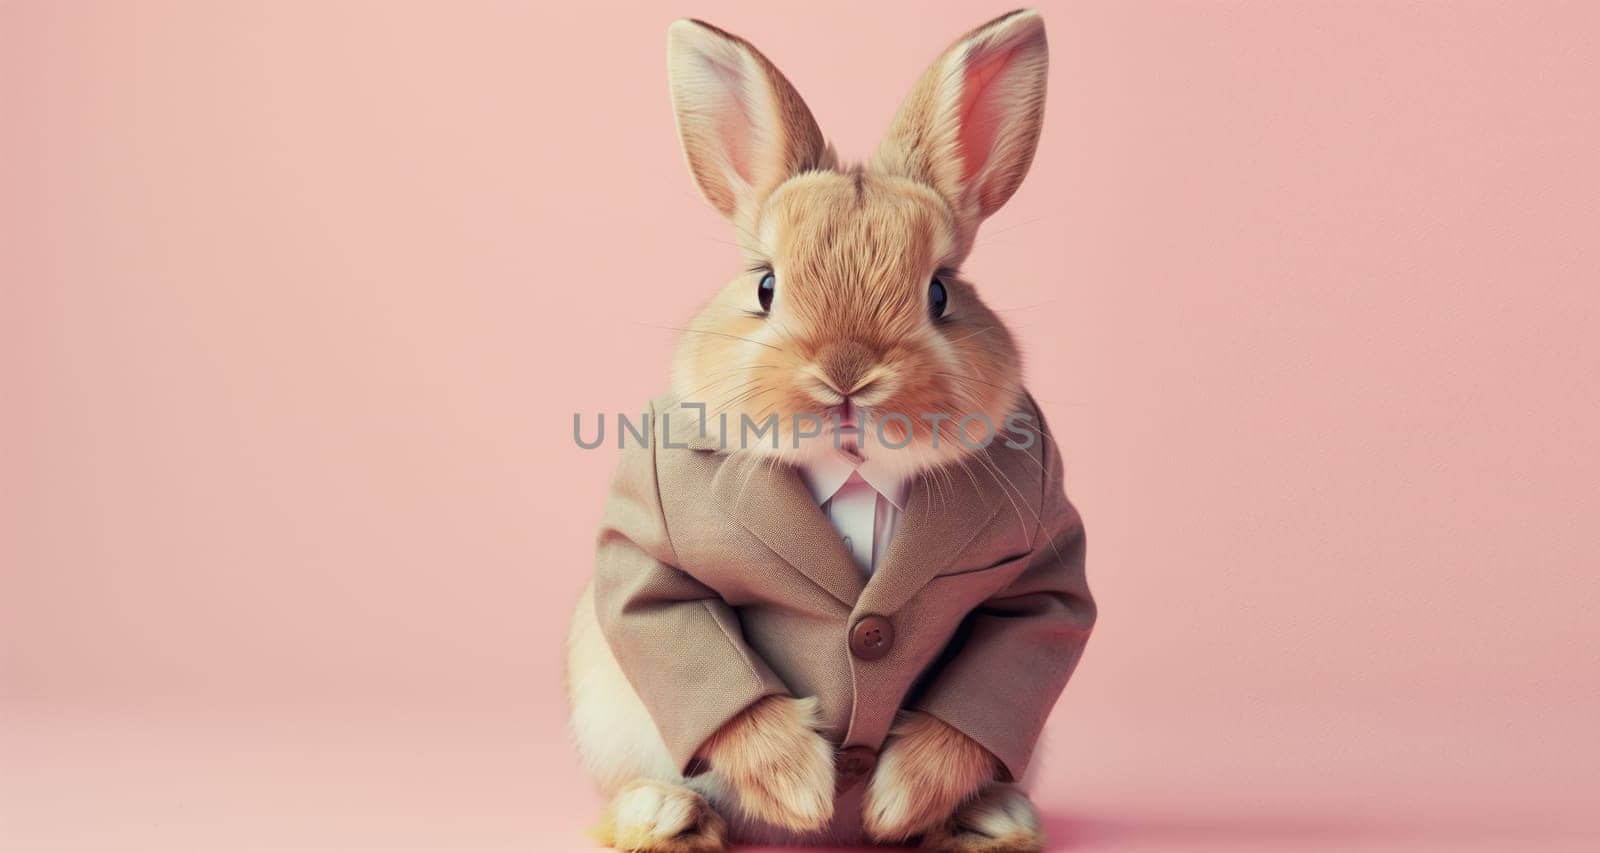 Cute funny bunny in a suit looking at the camera on pink background, animal, creative concept by Rohappy